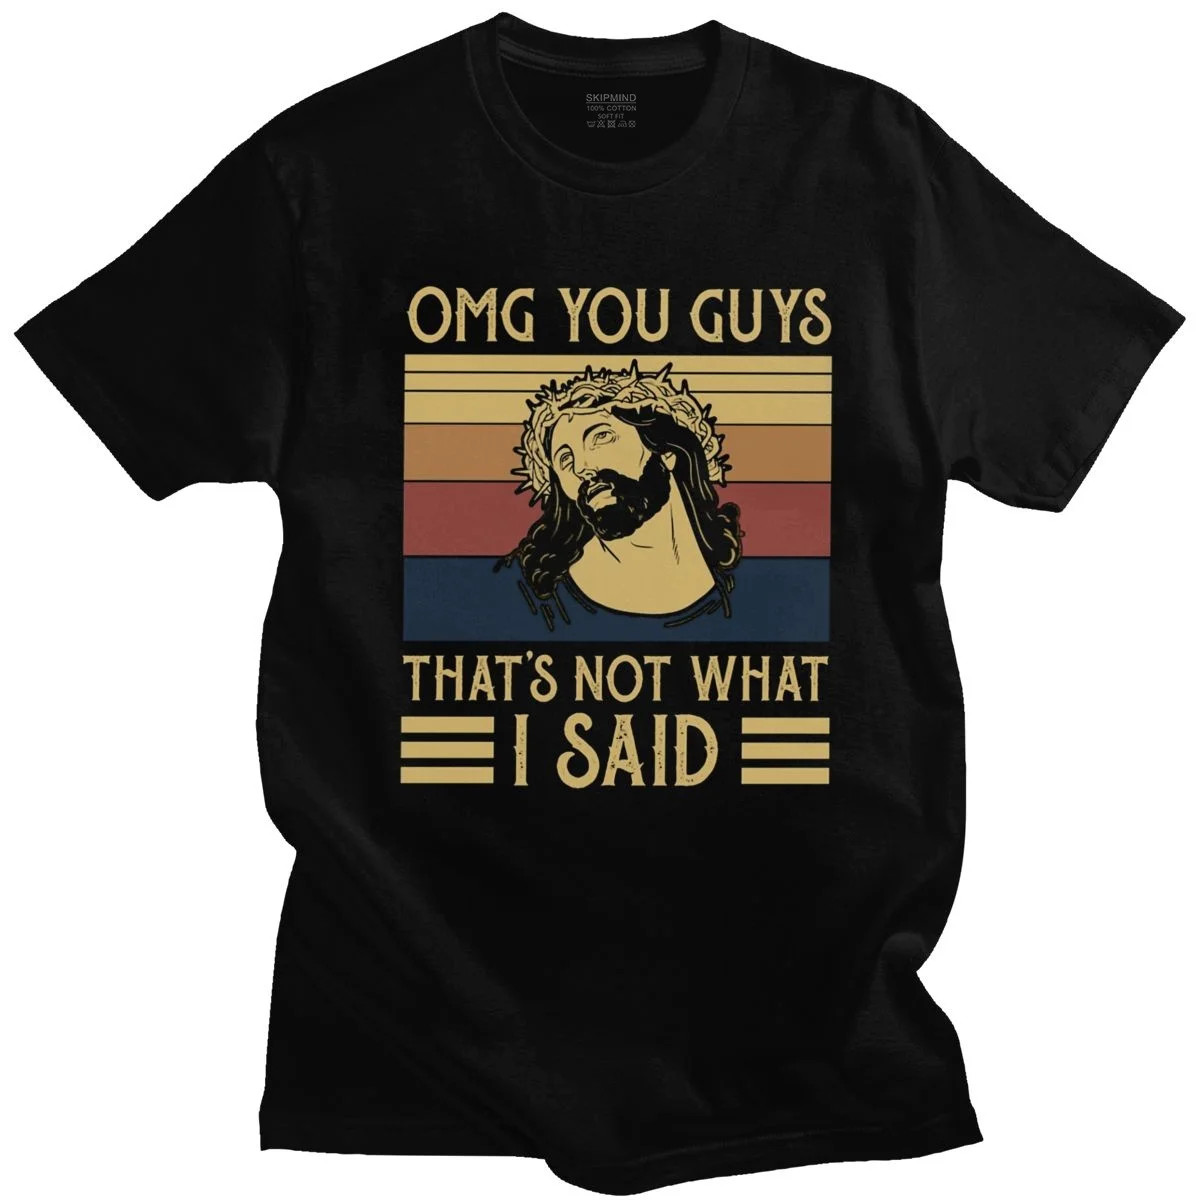 

You Guys That's Not What I Said Men T Shirt Cotton God Christian Jesus Christ Tee Top Vintage Short Sleeve Casual Tshirt Clothes